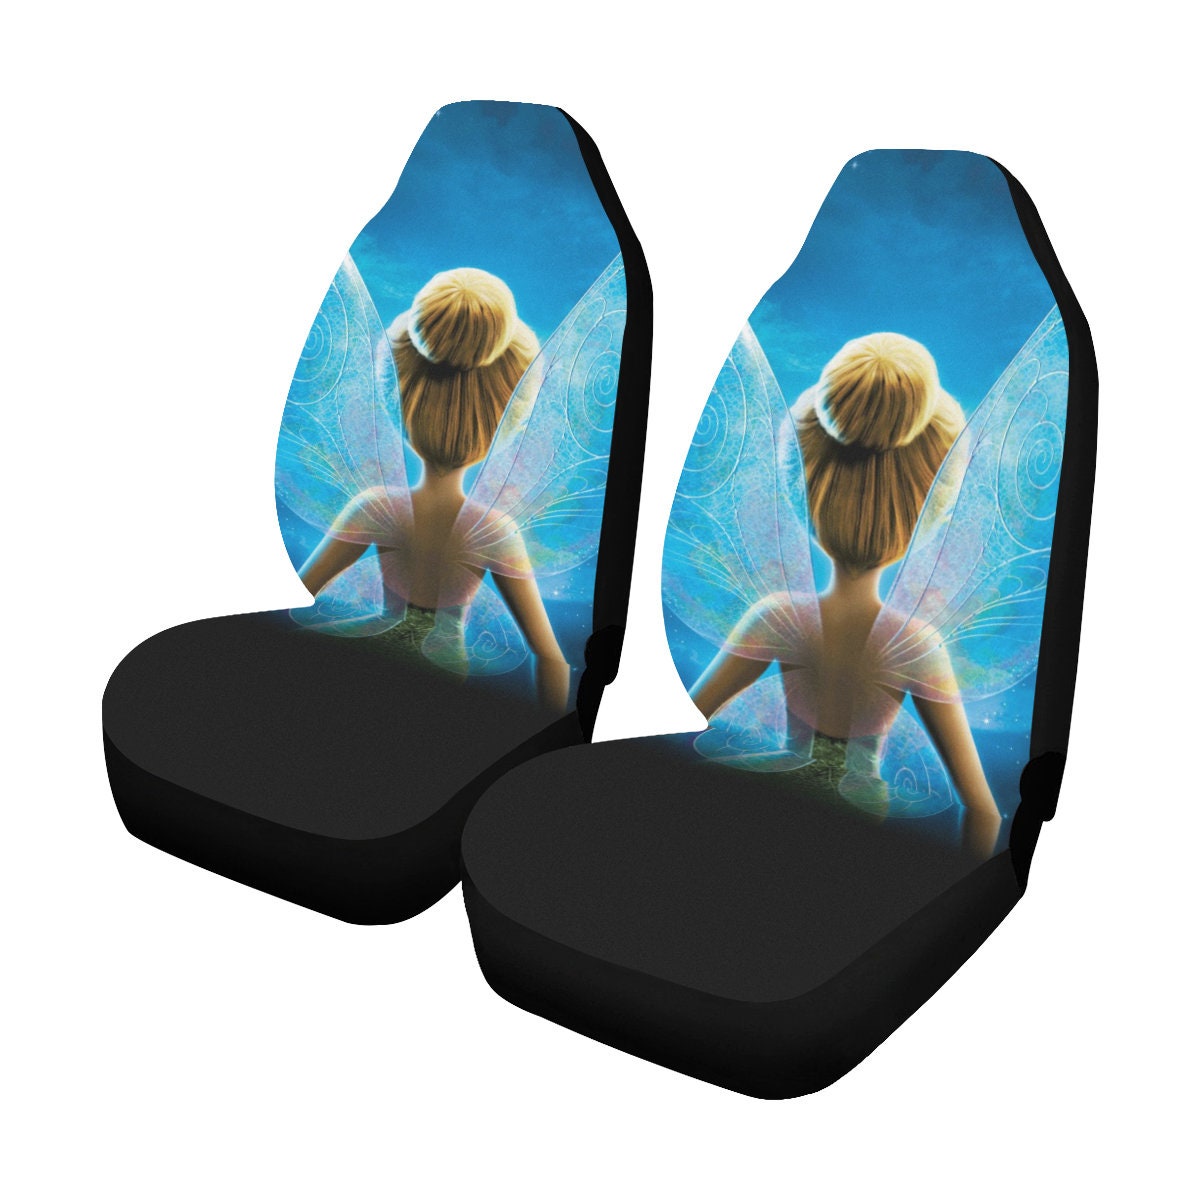 Tinker Bell Car Seat Covers | Tinker Bell Car Accessory | Disney Car Seat Covers